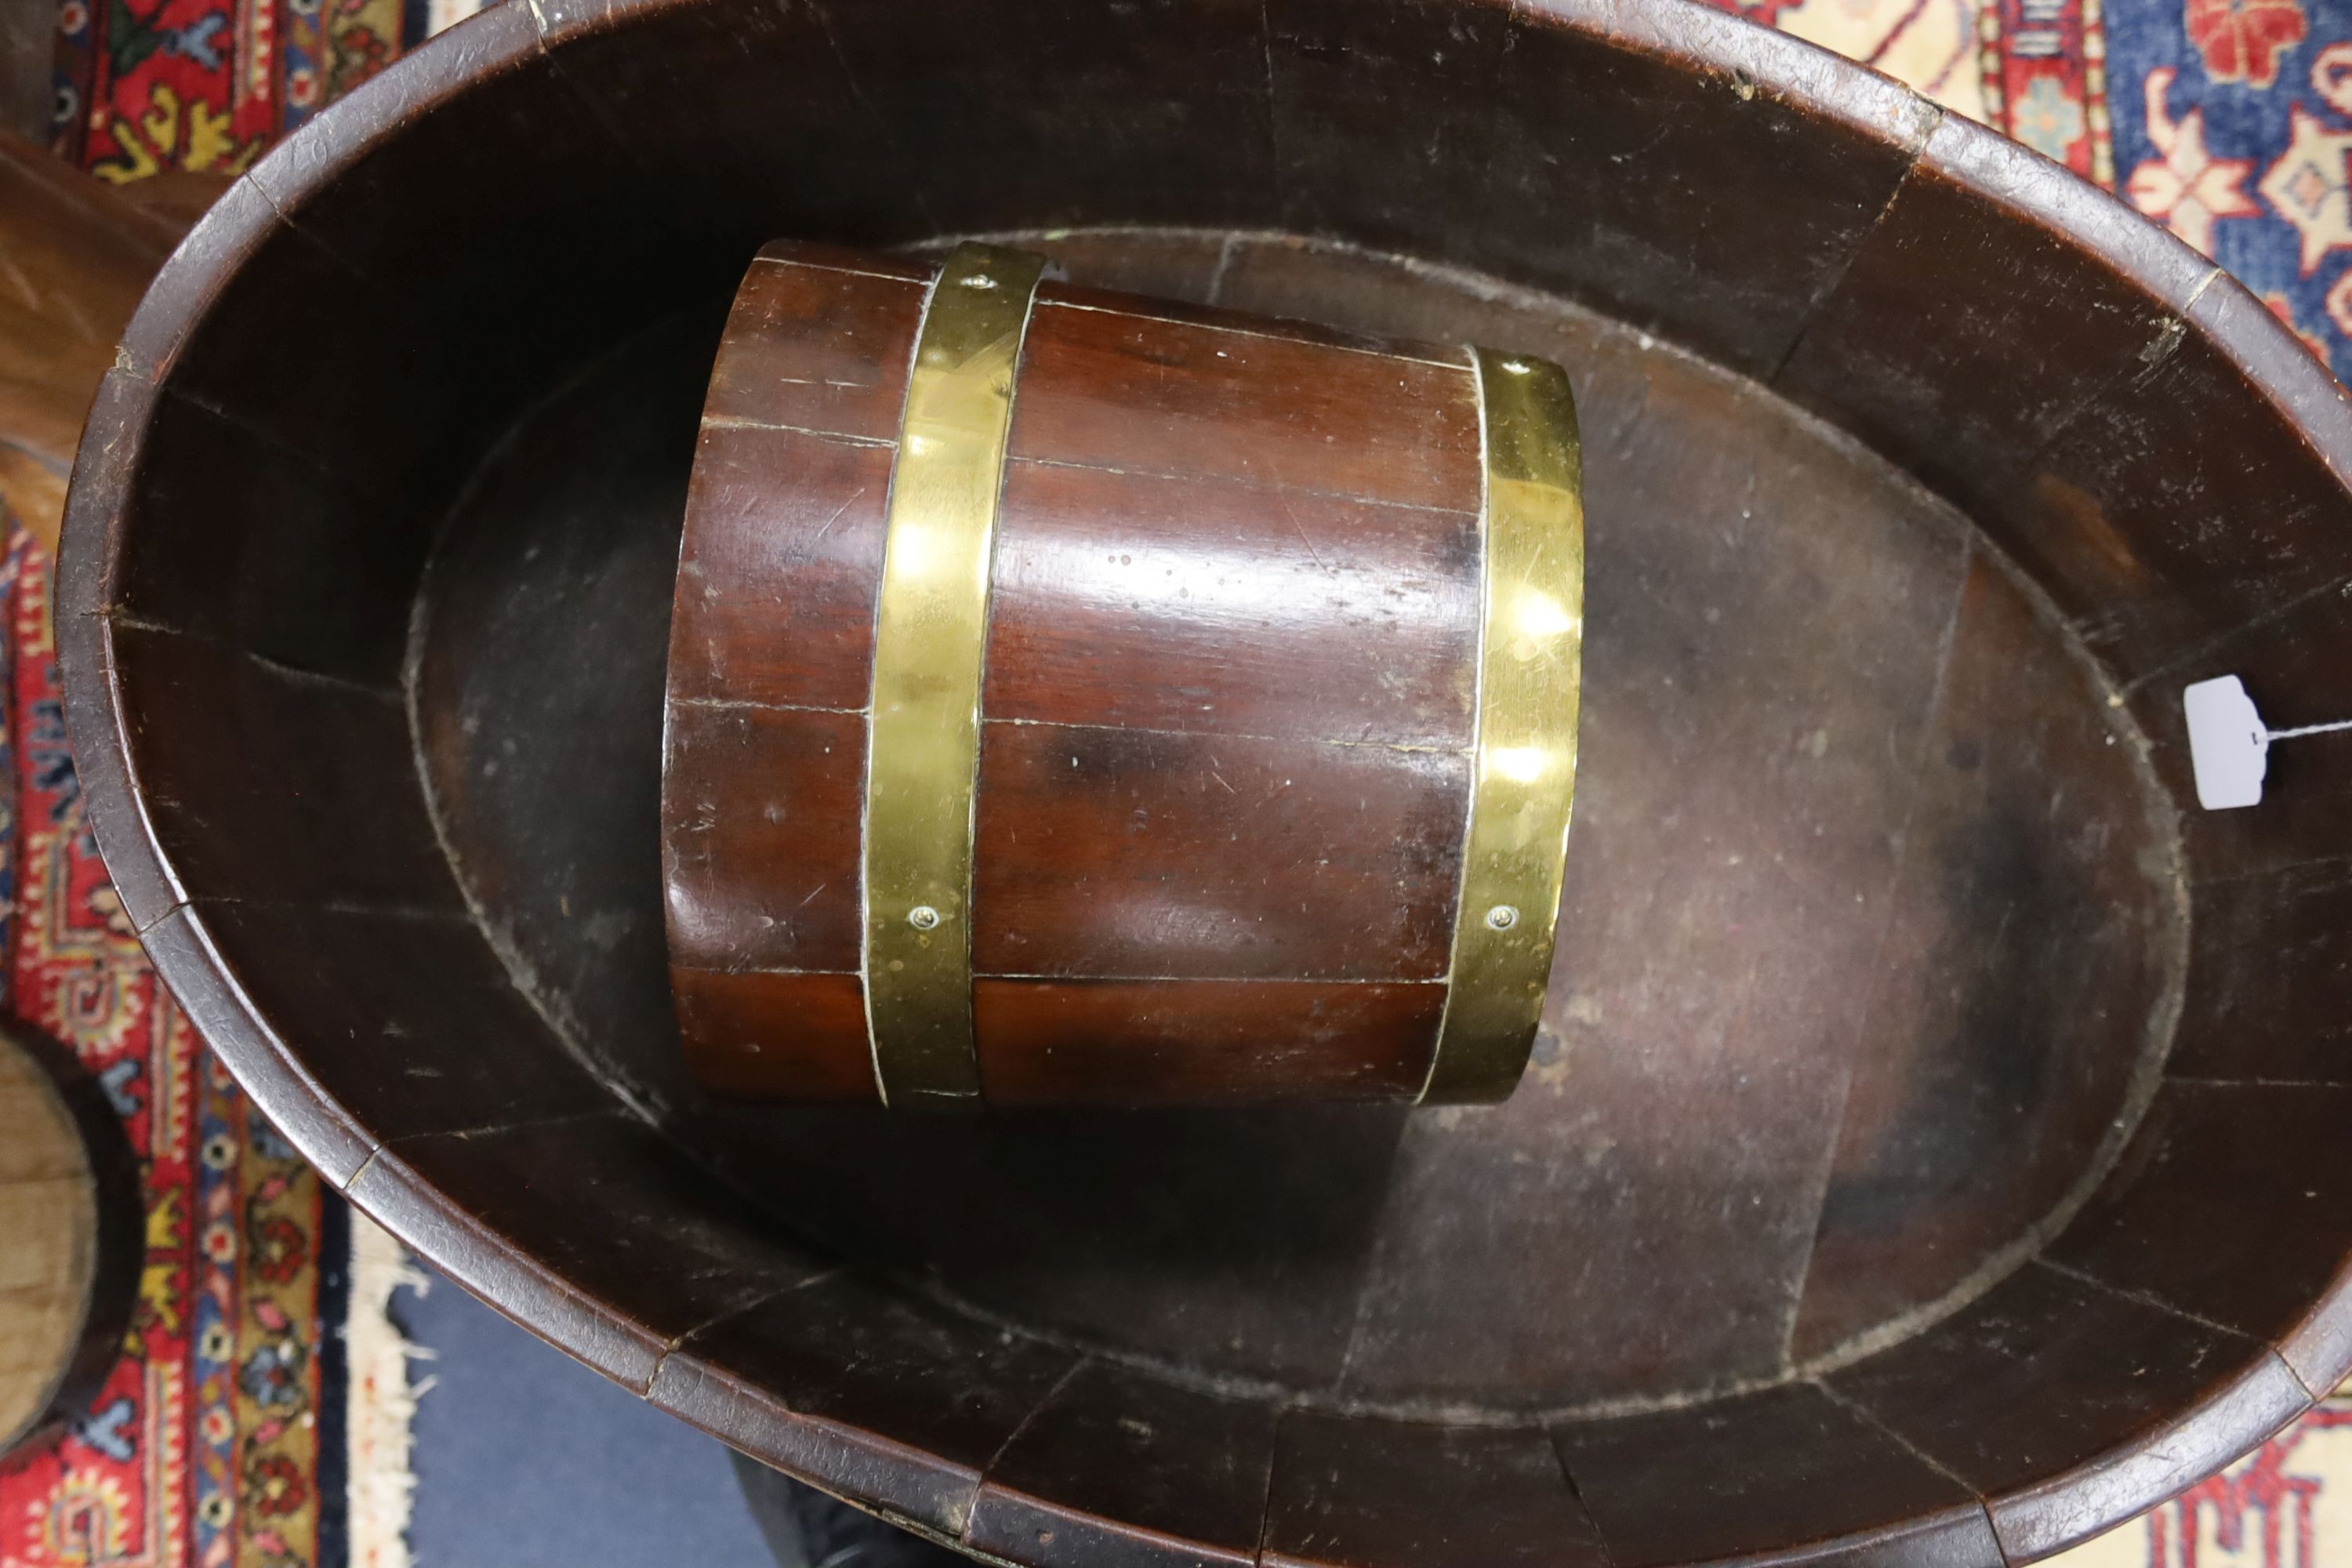 A George III provinical brass bound mahogany planter, width 62cm, depth 42cm, height 60cm, together with a small brass bound mahogany pail